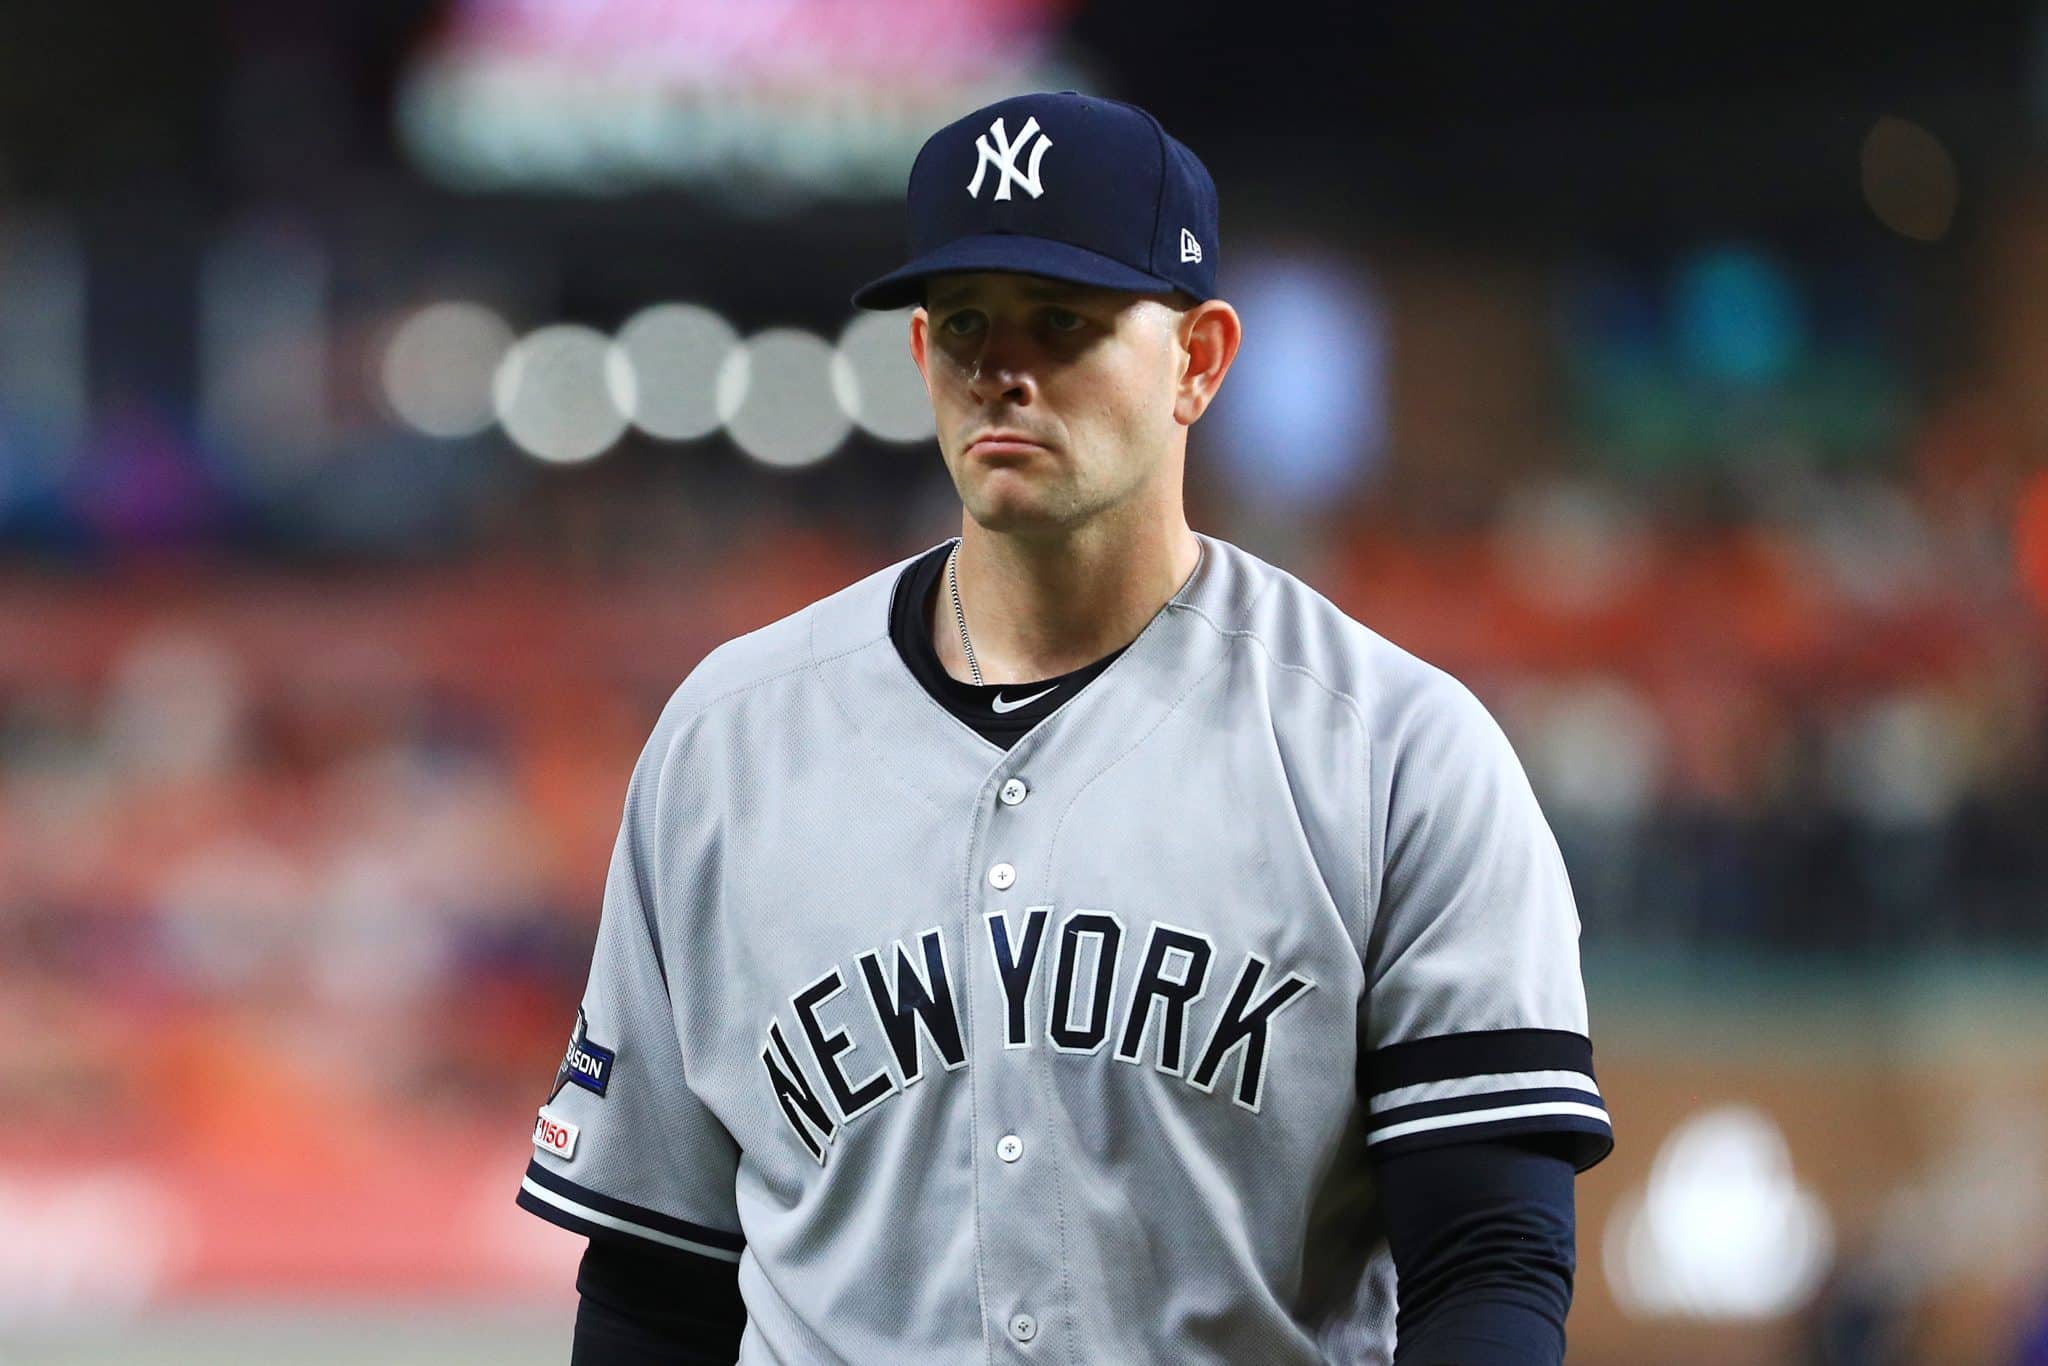 HOUSTON, TEXAS - OCTOBER 13: James Paxton #65 of the New York Yankees walks to the dugout after pitching during the first inning against the Houston Astros in game two of the American League Championship Series at Minute Maid Park on October 13, 2019 in Houston, Texas.